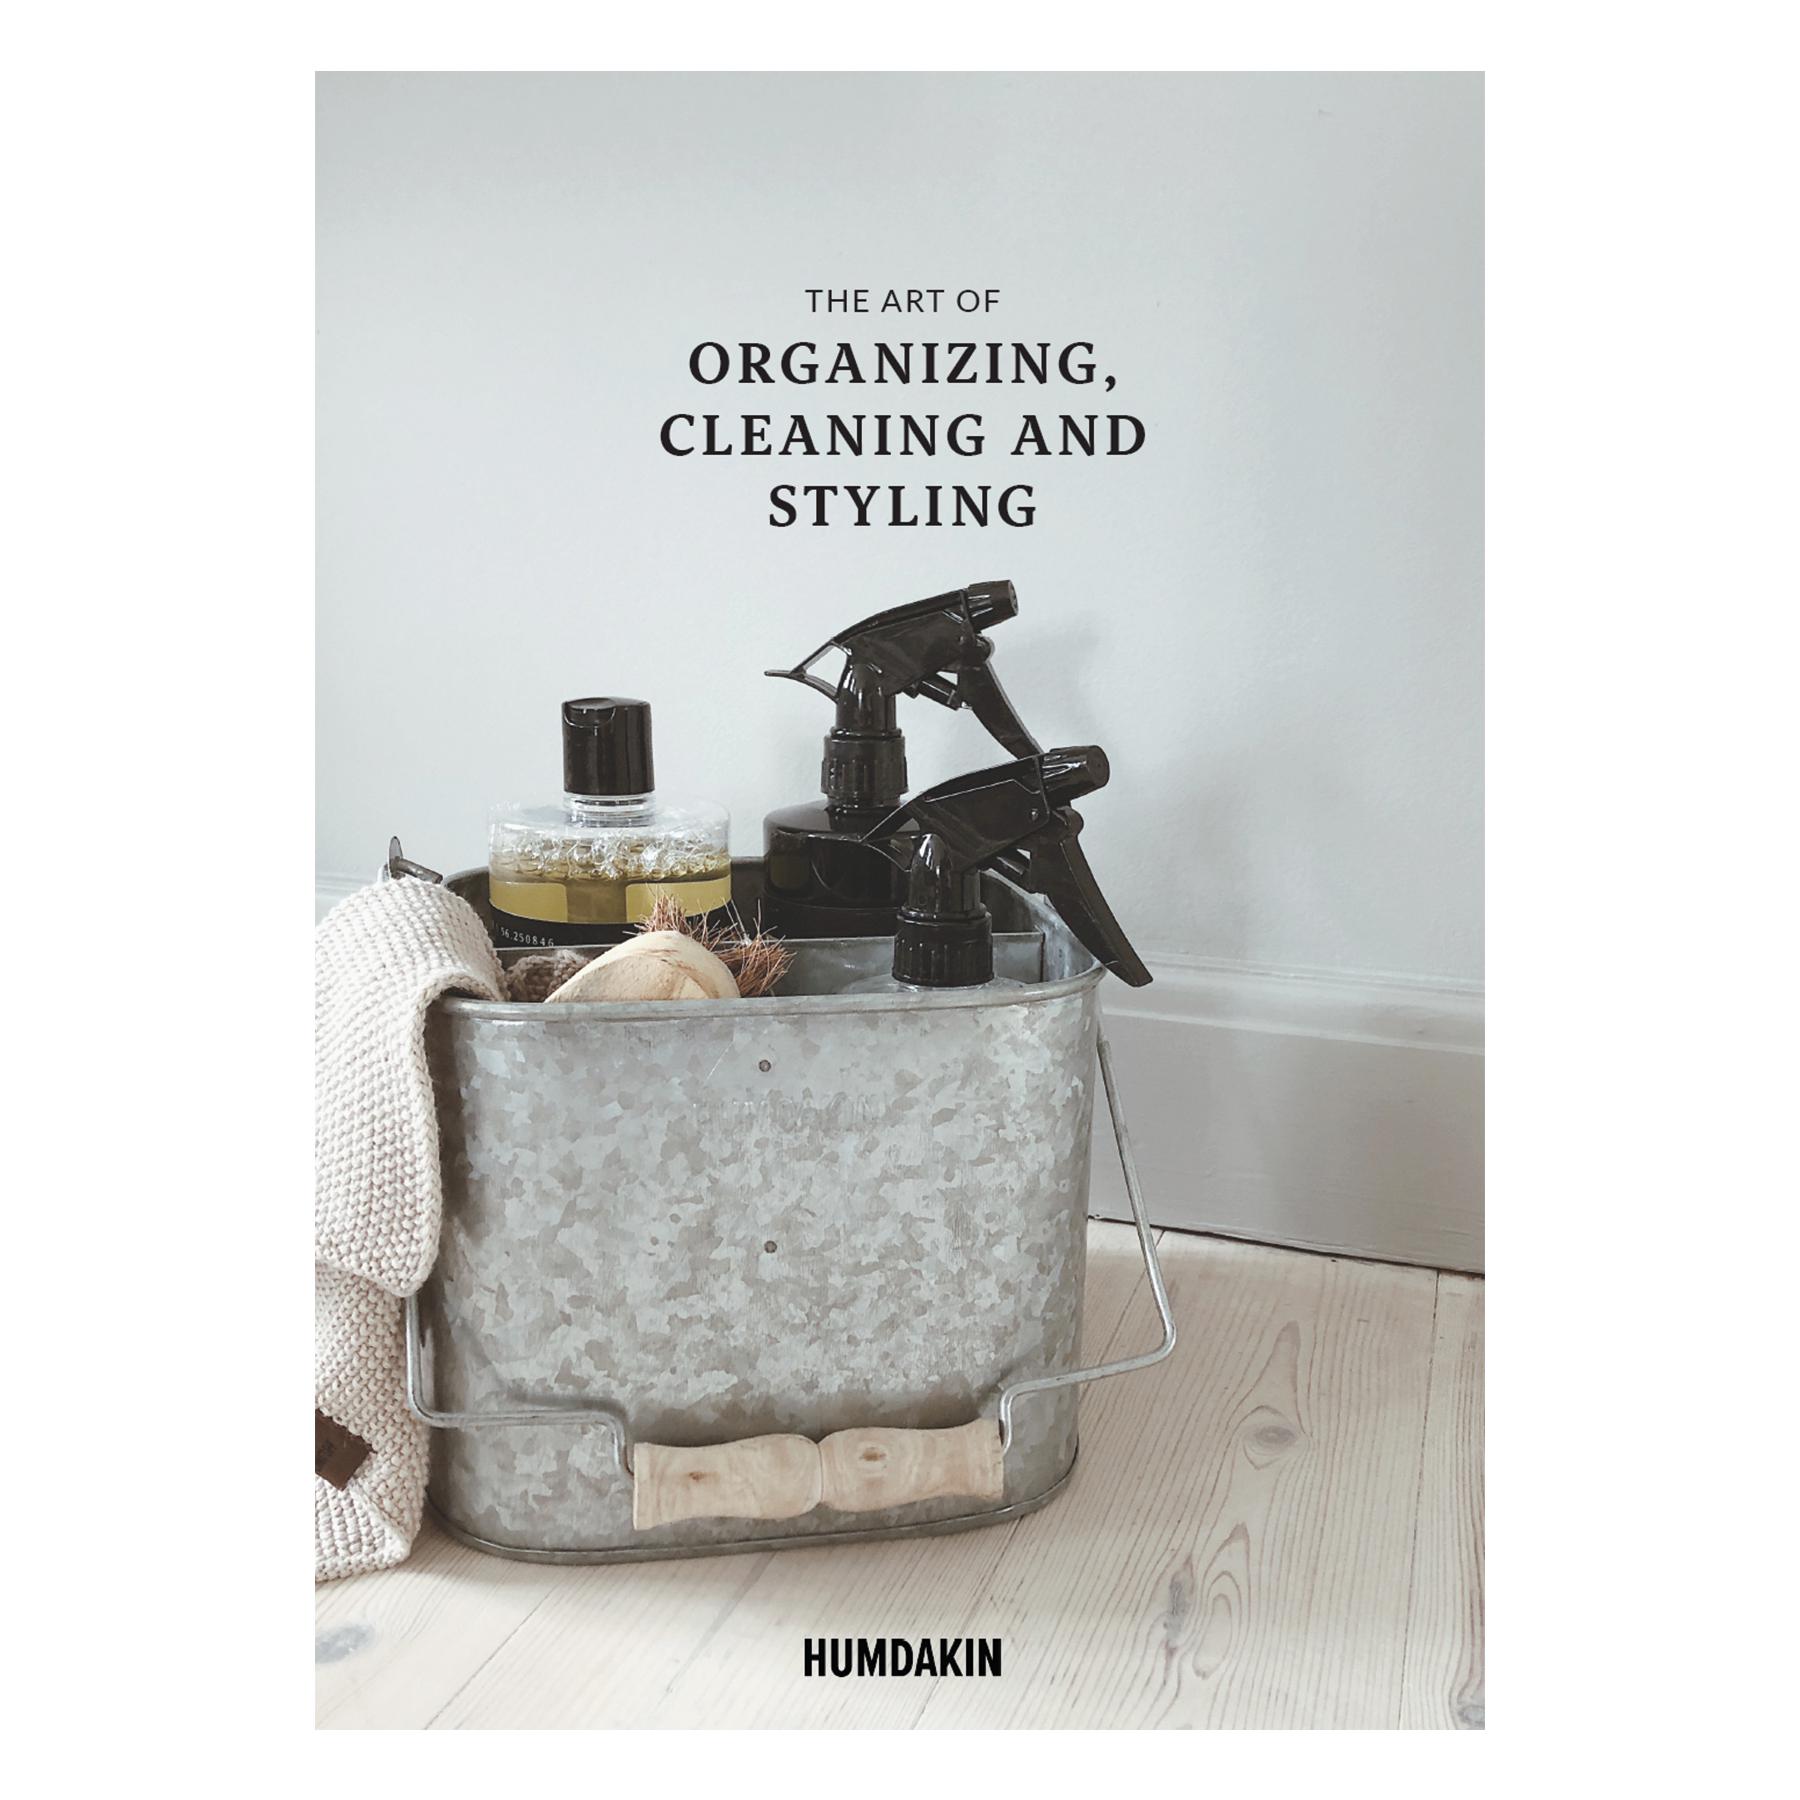 Humdakin Bog: The Art of Organizing, Cleaning and Styling